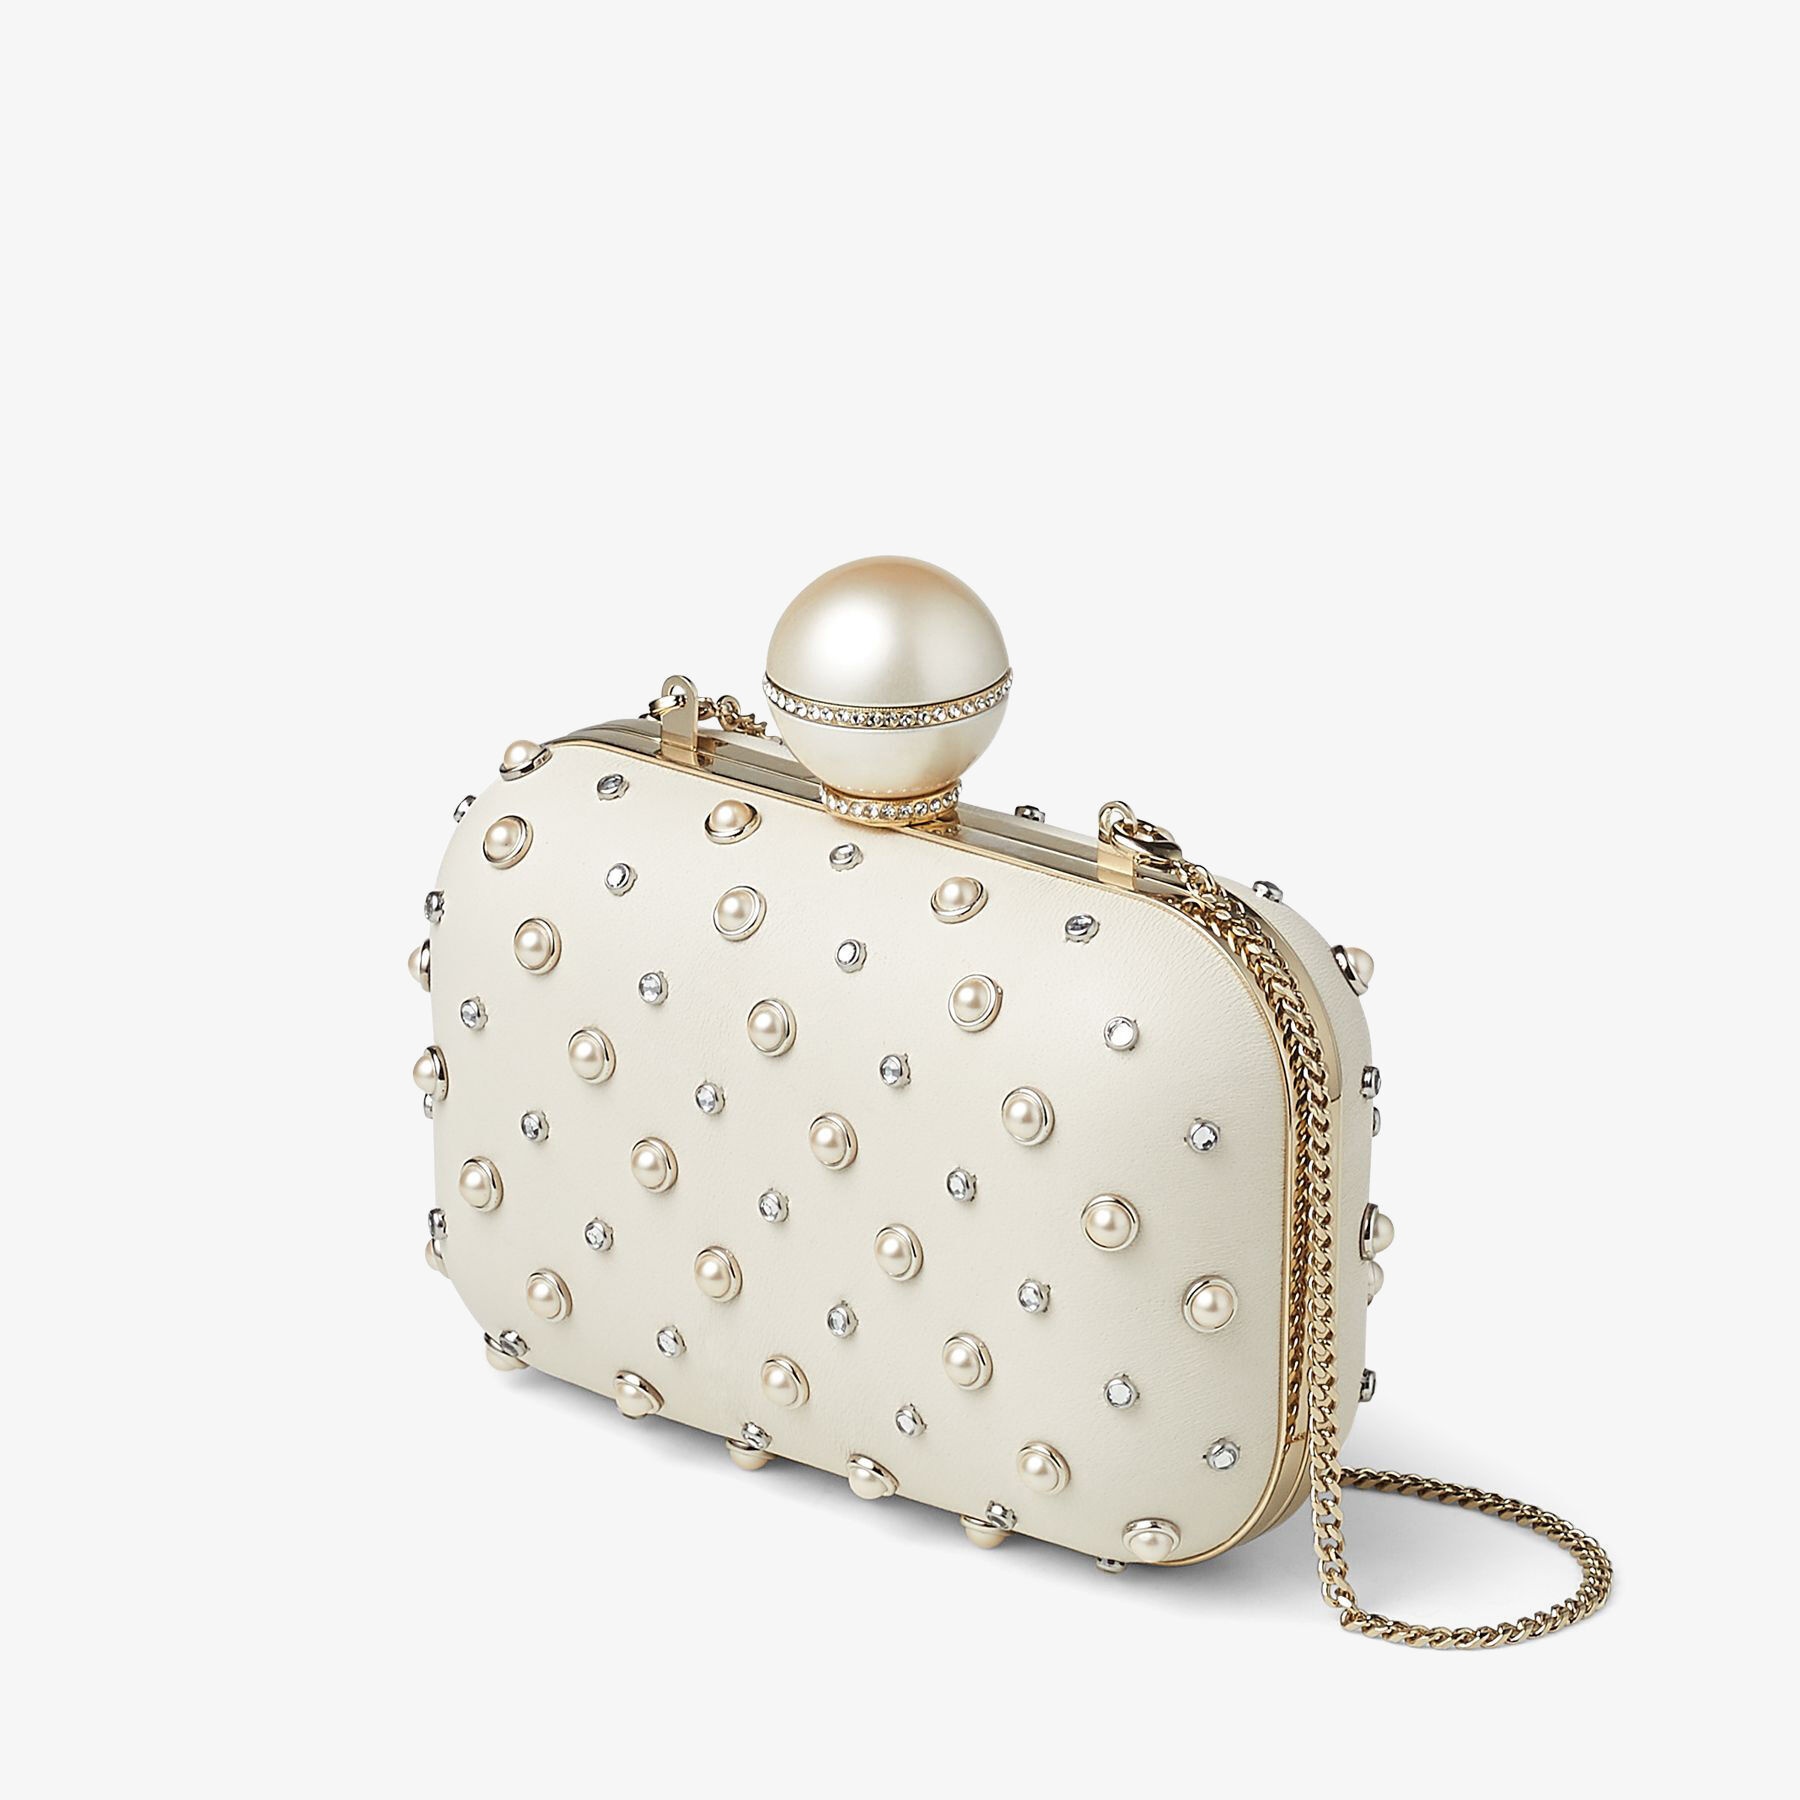 Cloud
Pearl Mix Clutch Bag with Ball Clasp - 4